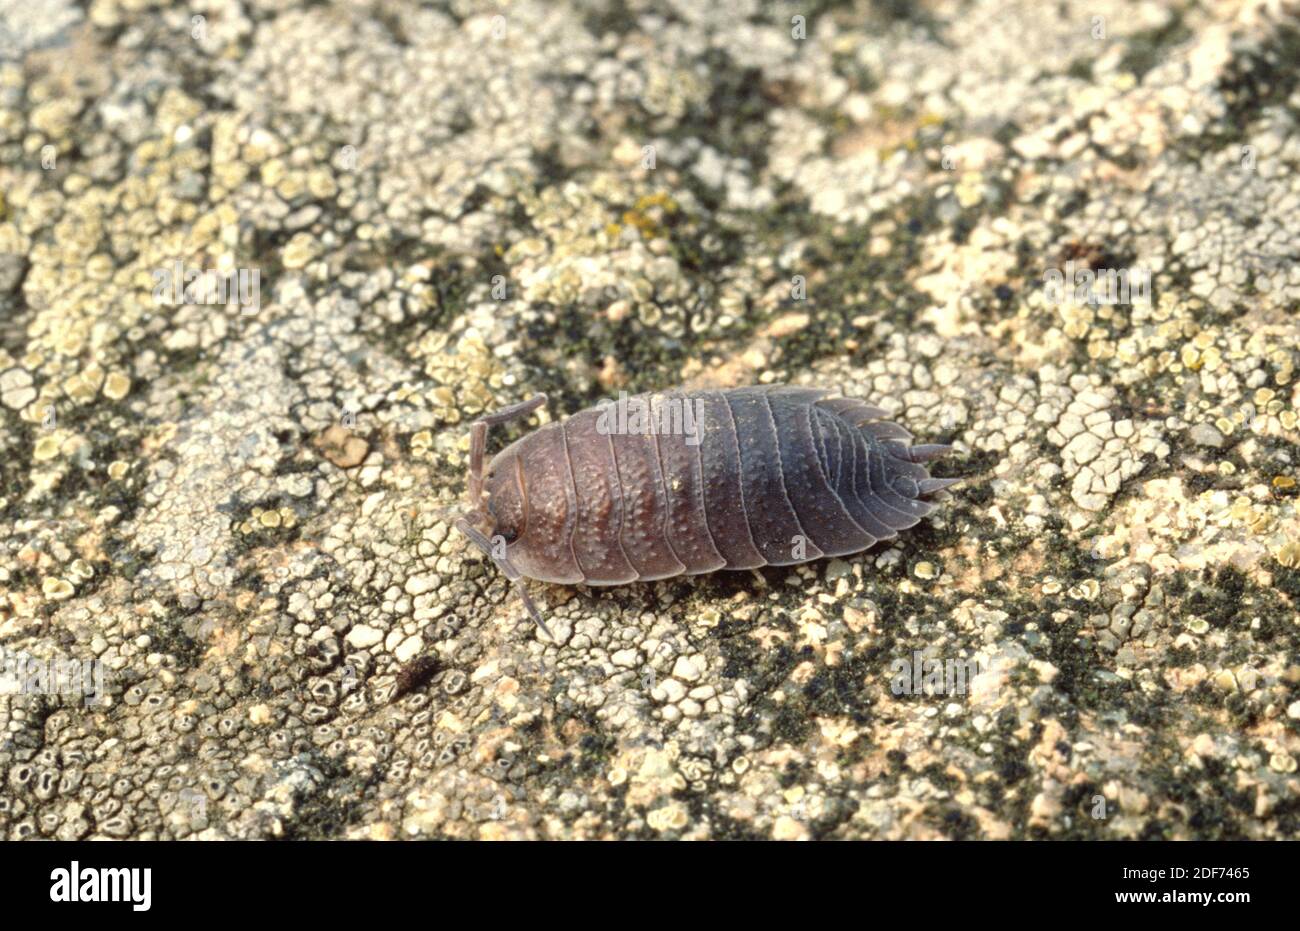 Pill woodlouse or pill-bug (Armadillidium vulgare) is a terrestrial crustacean that lives in humid areas of Mediterranean region.. Stock Photo